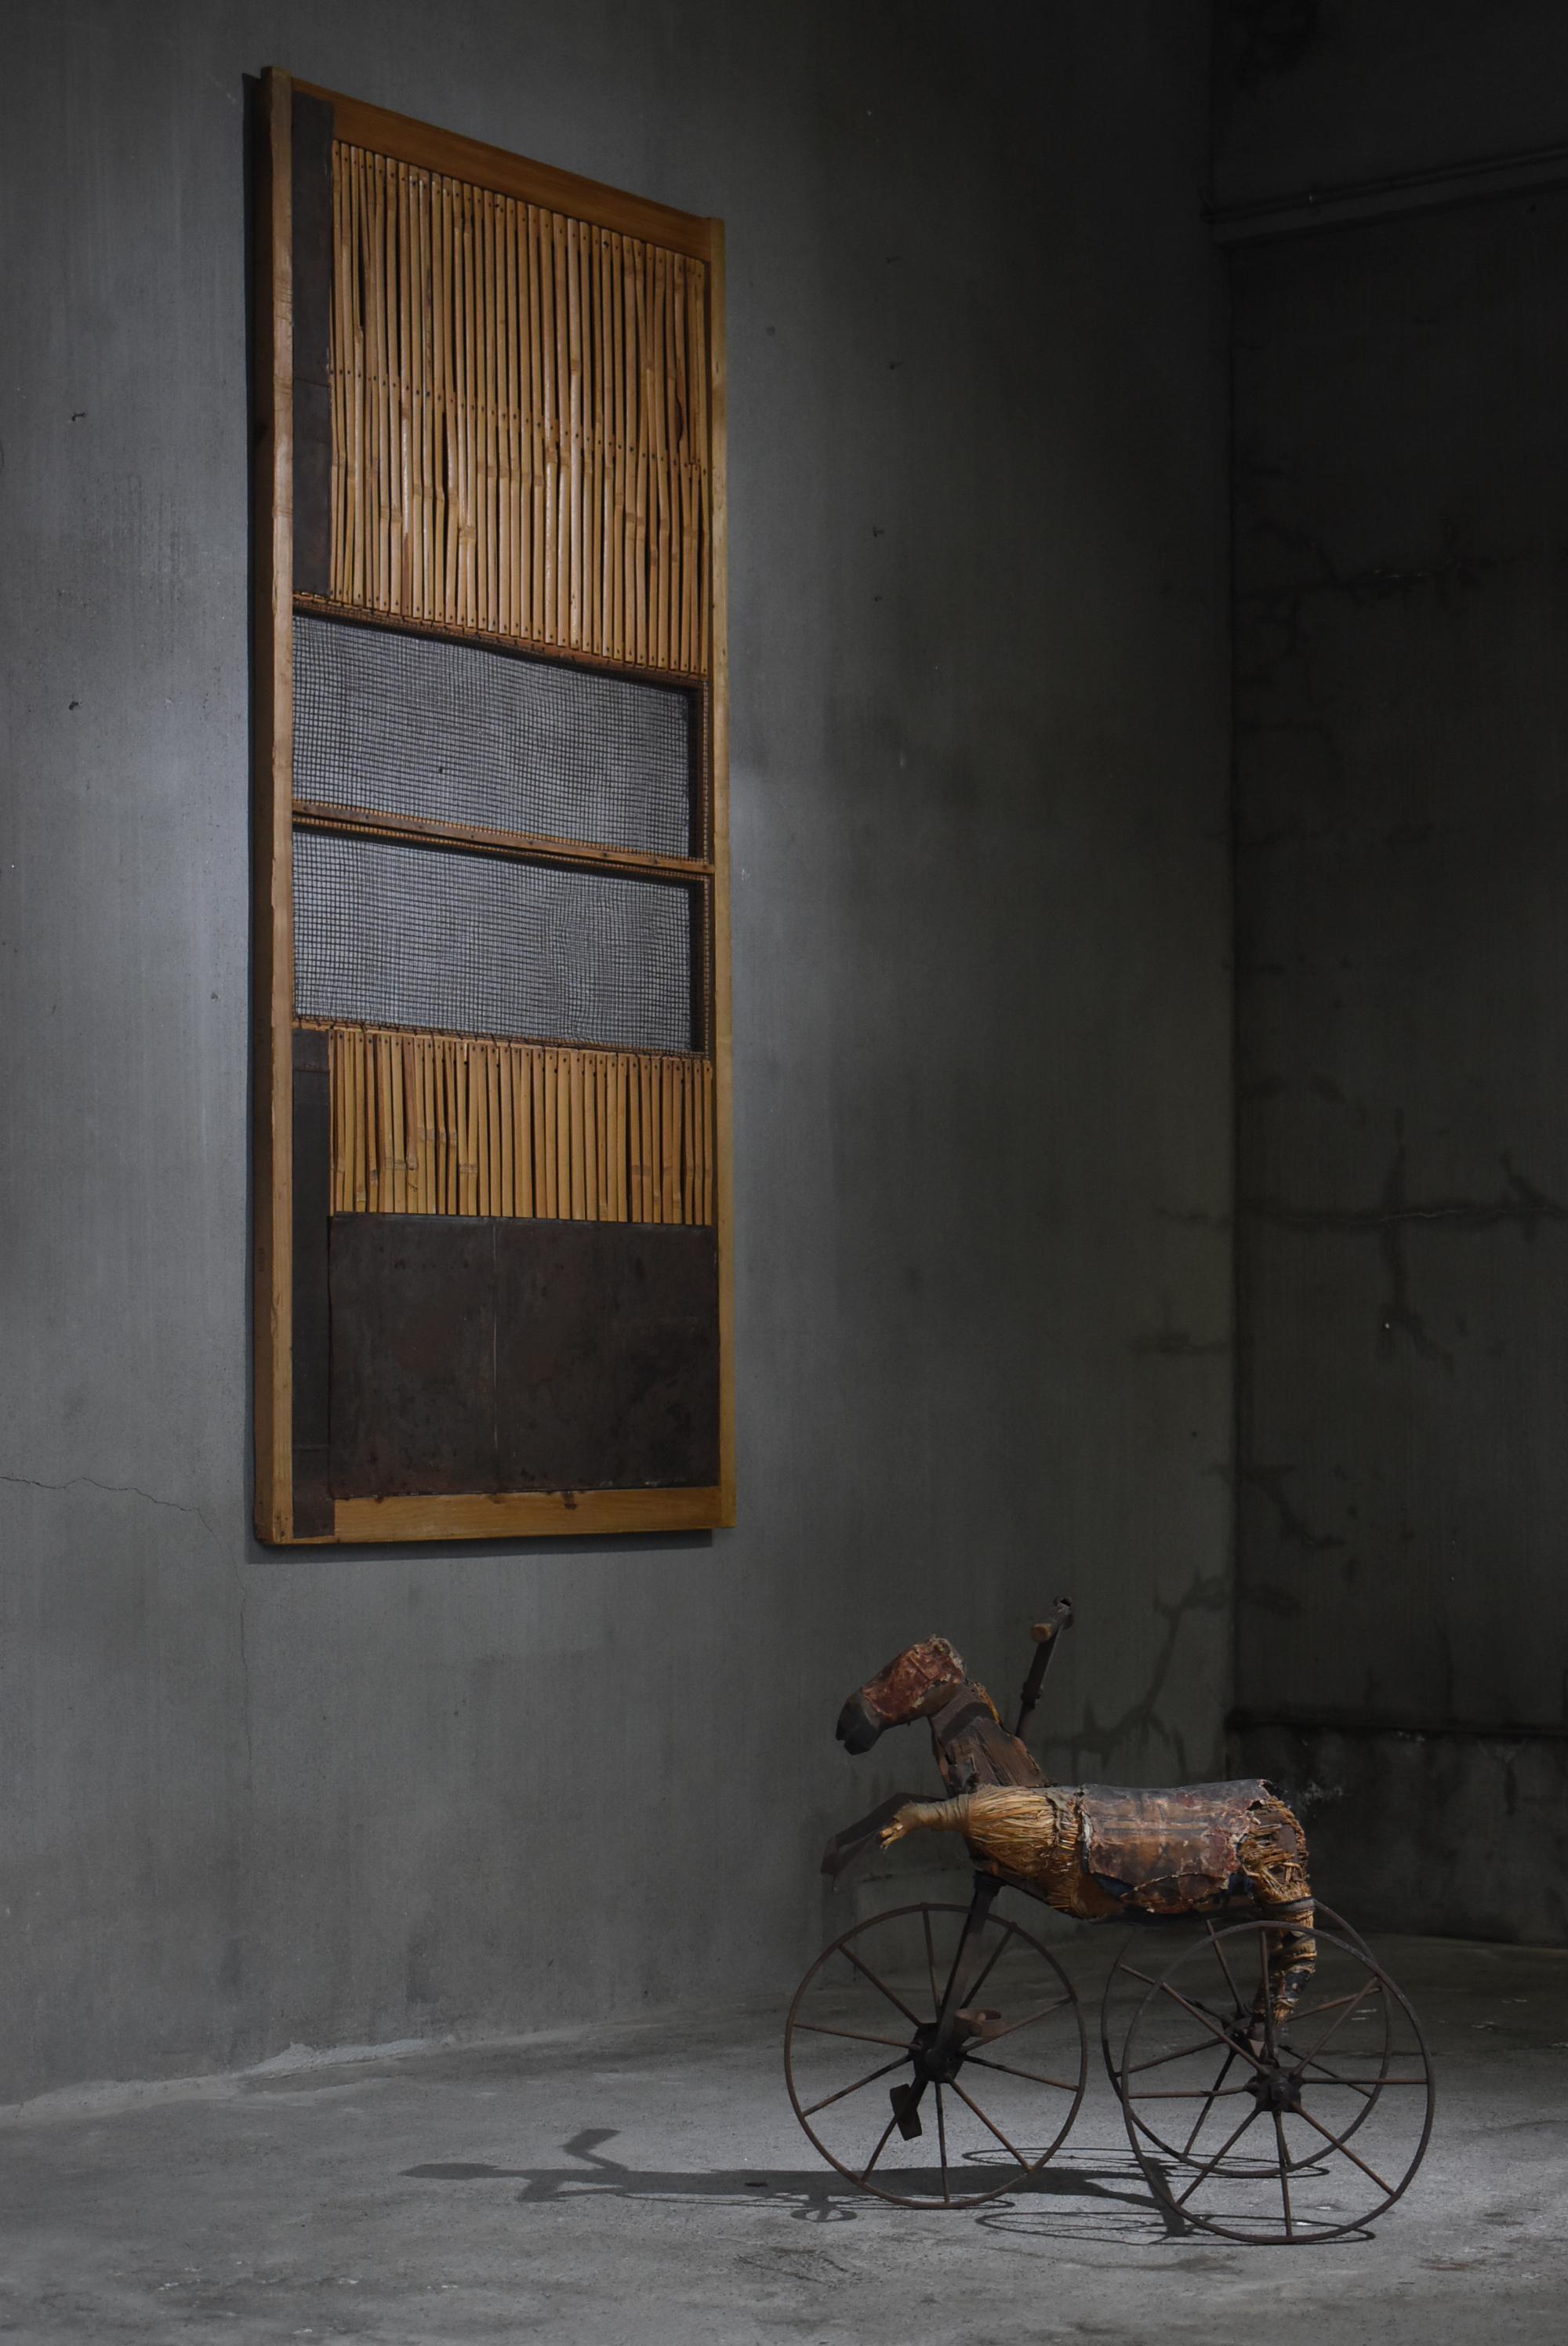 This is a very old sliding door made in Japan.
It is from the Meiji period (1860s-1920s).
It is mainly made of cedar wood and bamboo, and reinforced with tin.
This composition is very unique and looks like an abstract painting.
You can actually use